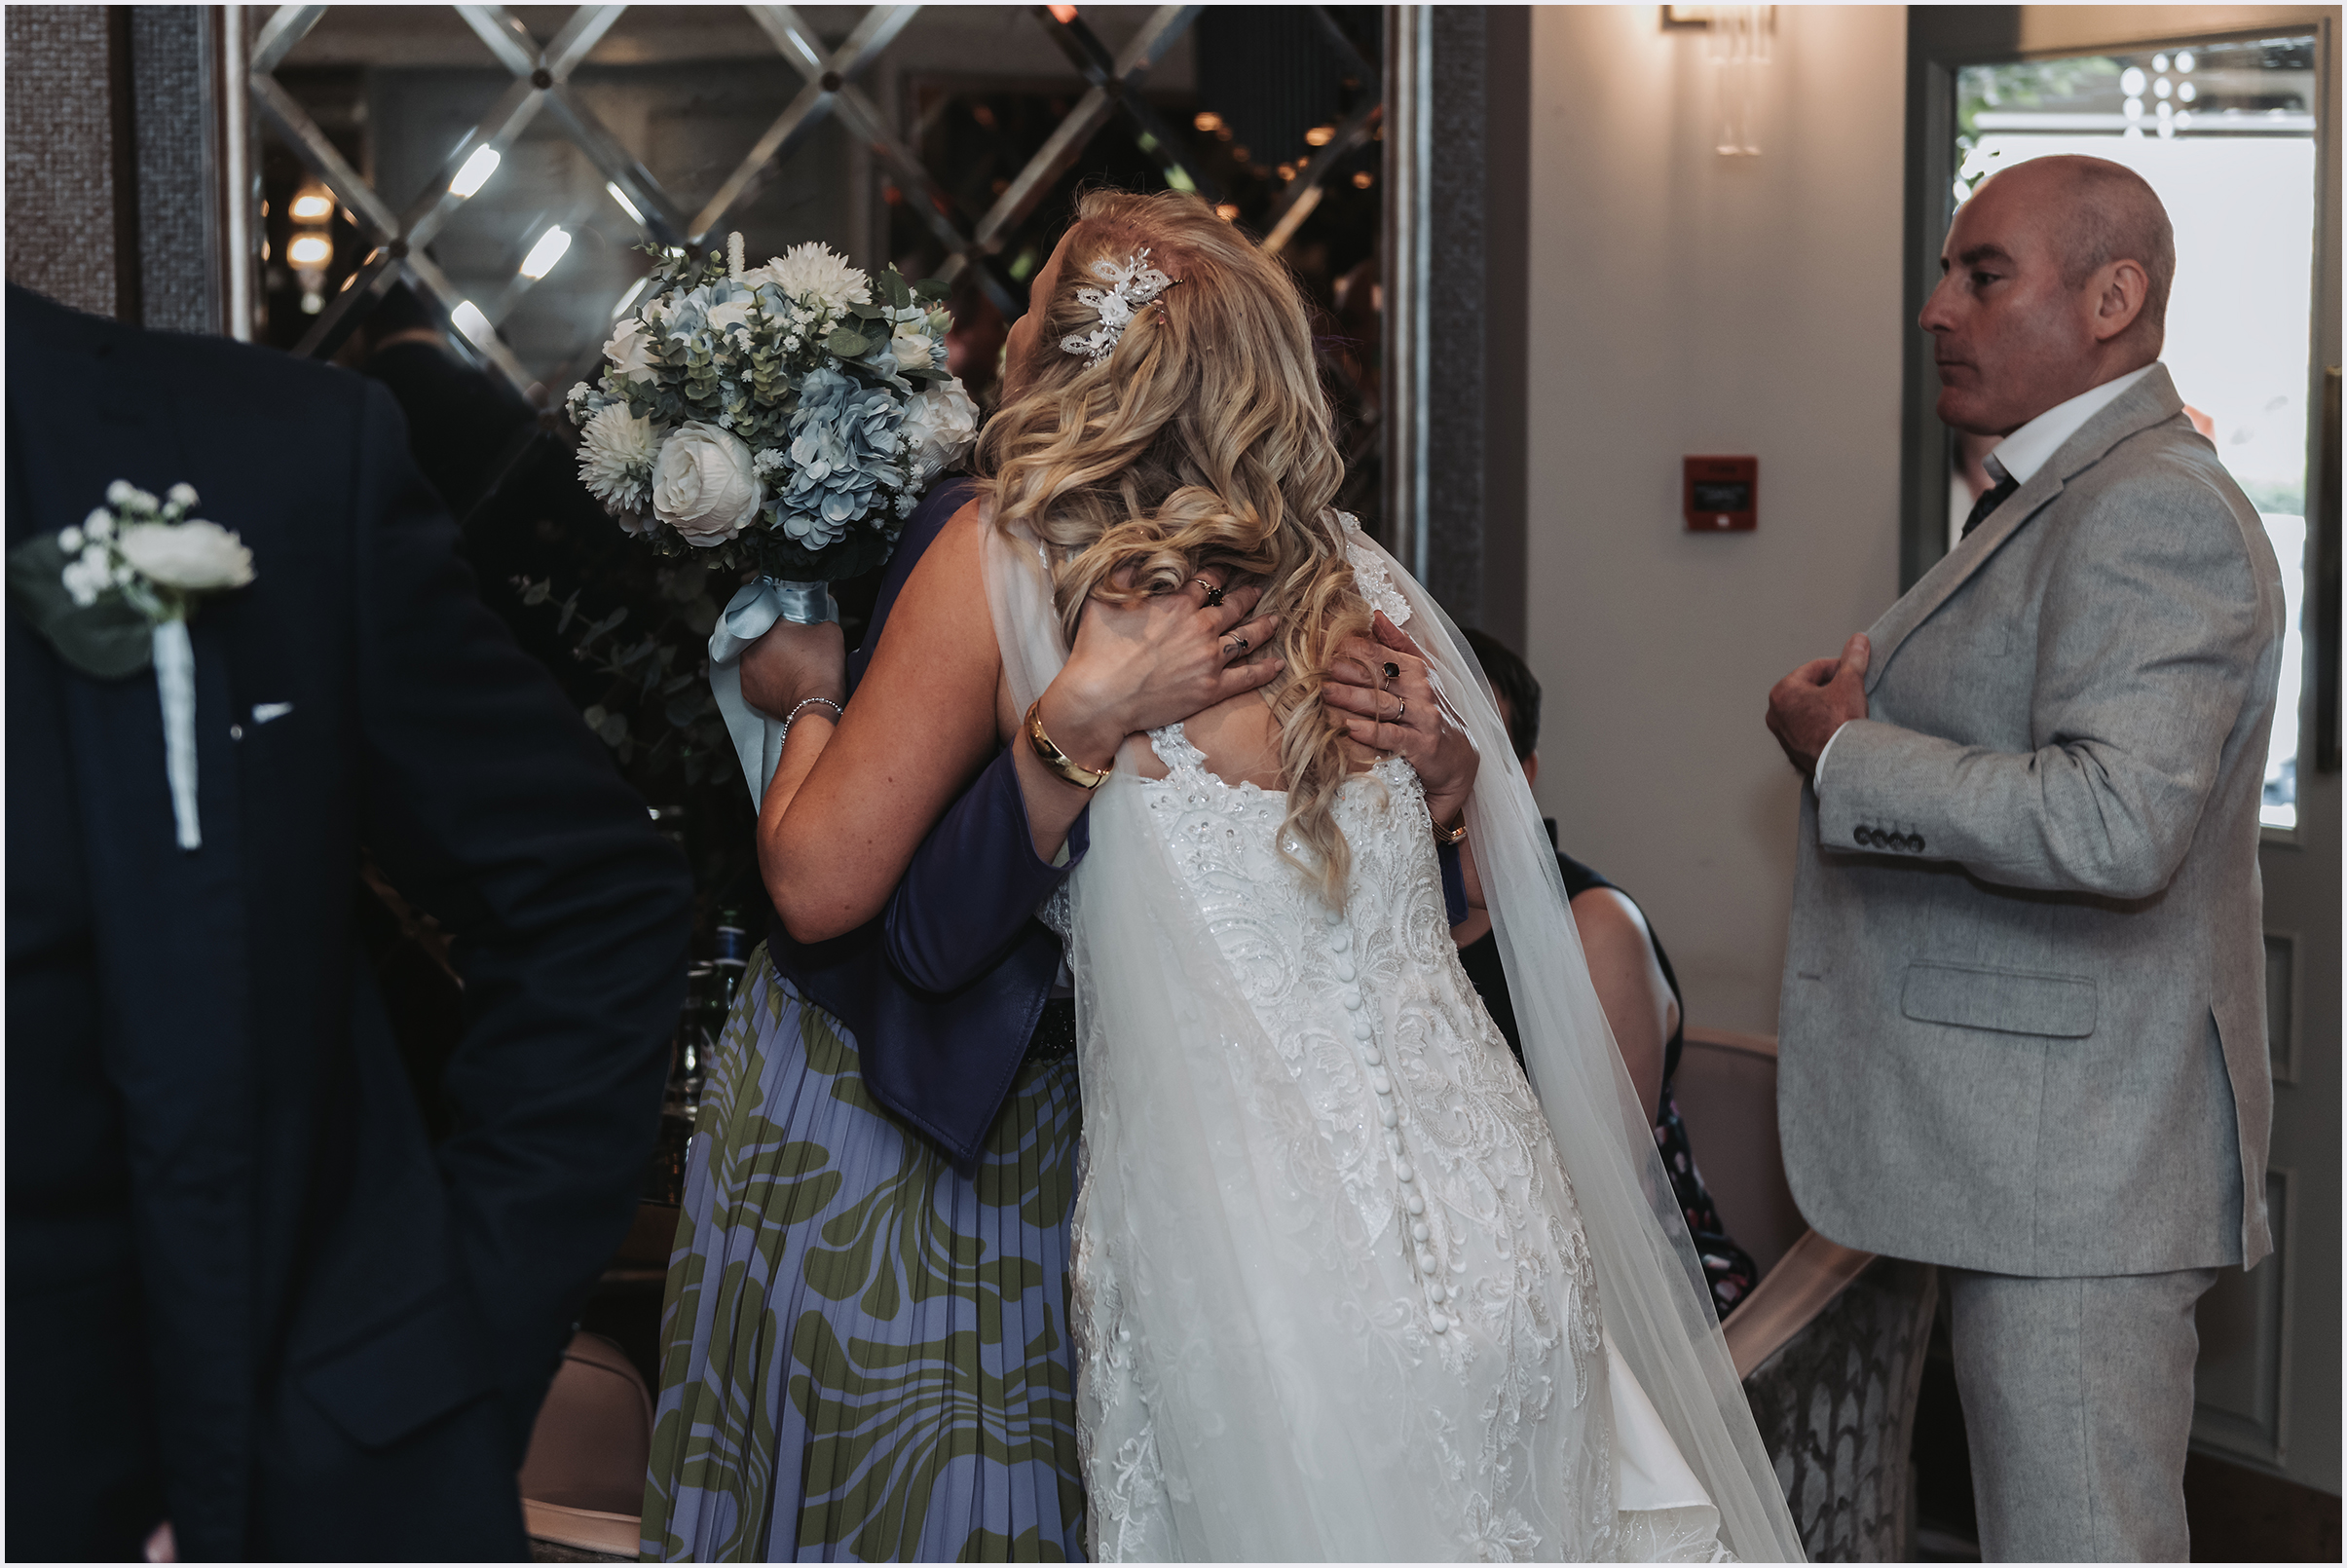 A bride is congratulated for getting married with an embrace with one her guests.  Image captured by North Wales Wedding Photographer Helena Jayne Photography.